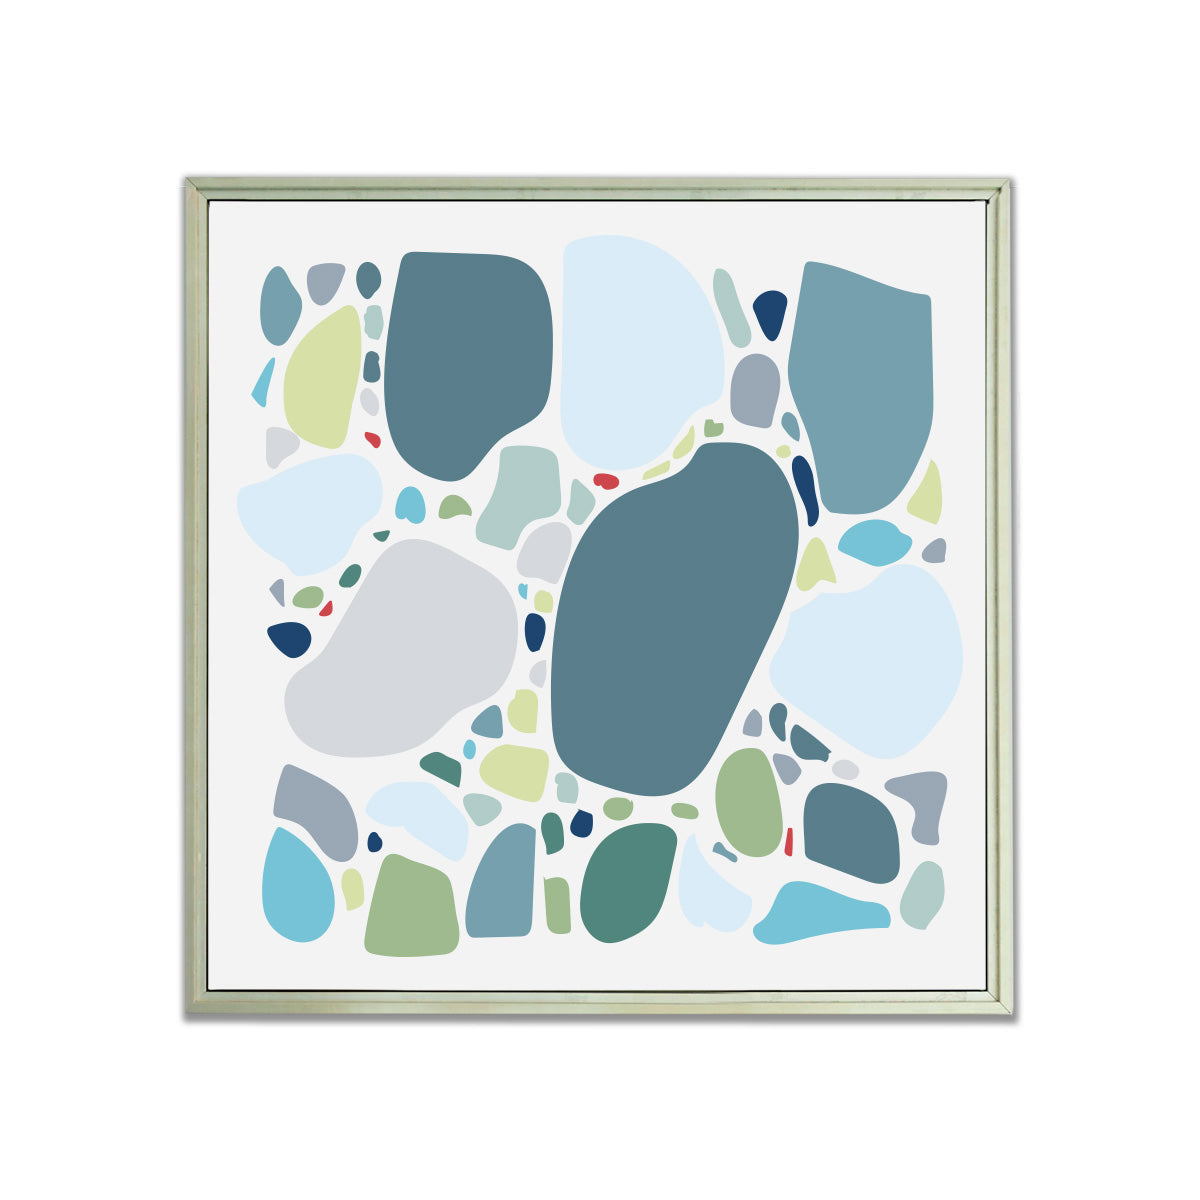 Maine Cottage Pebbles - Dark by Gene Barbera for Maine Cottage® 